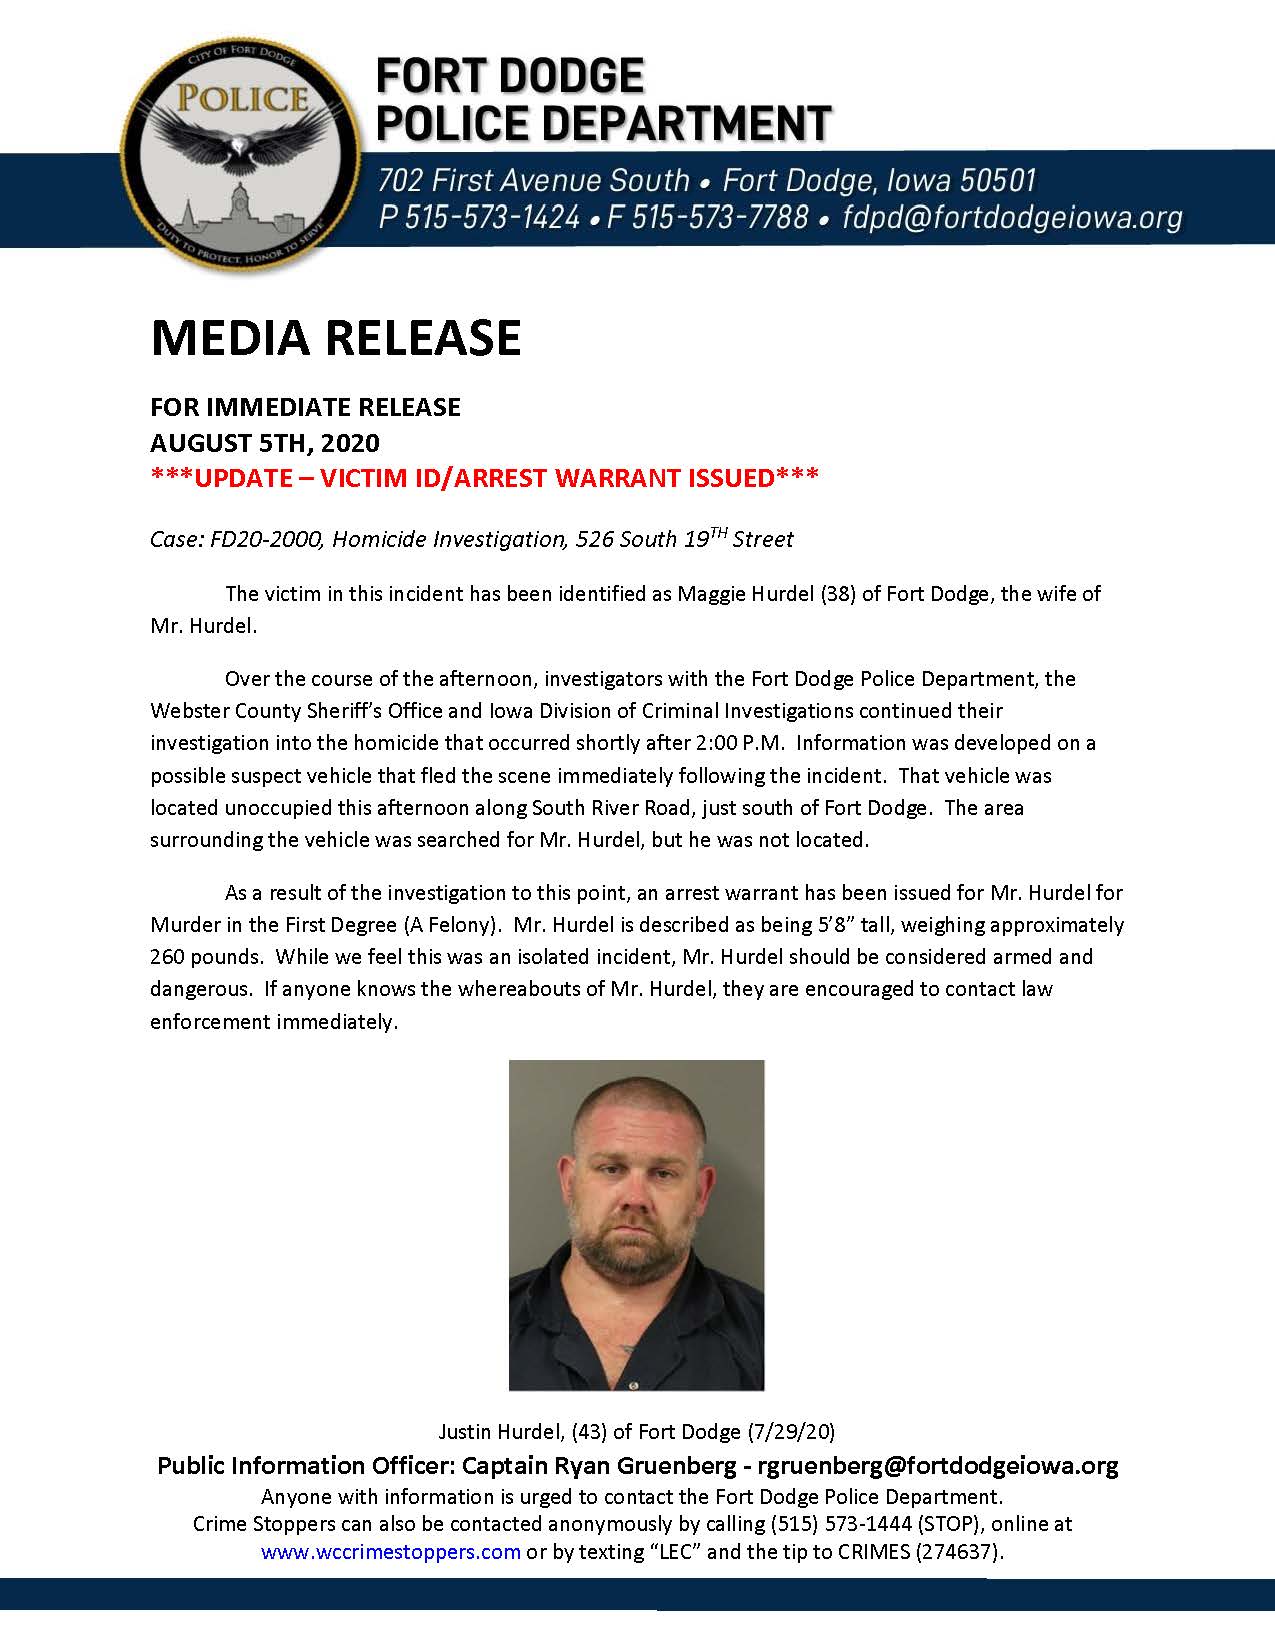 Link to Fort Dodge PD Press release image